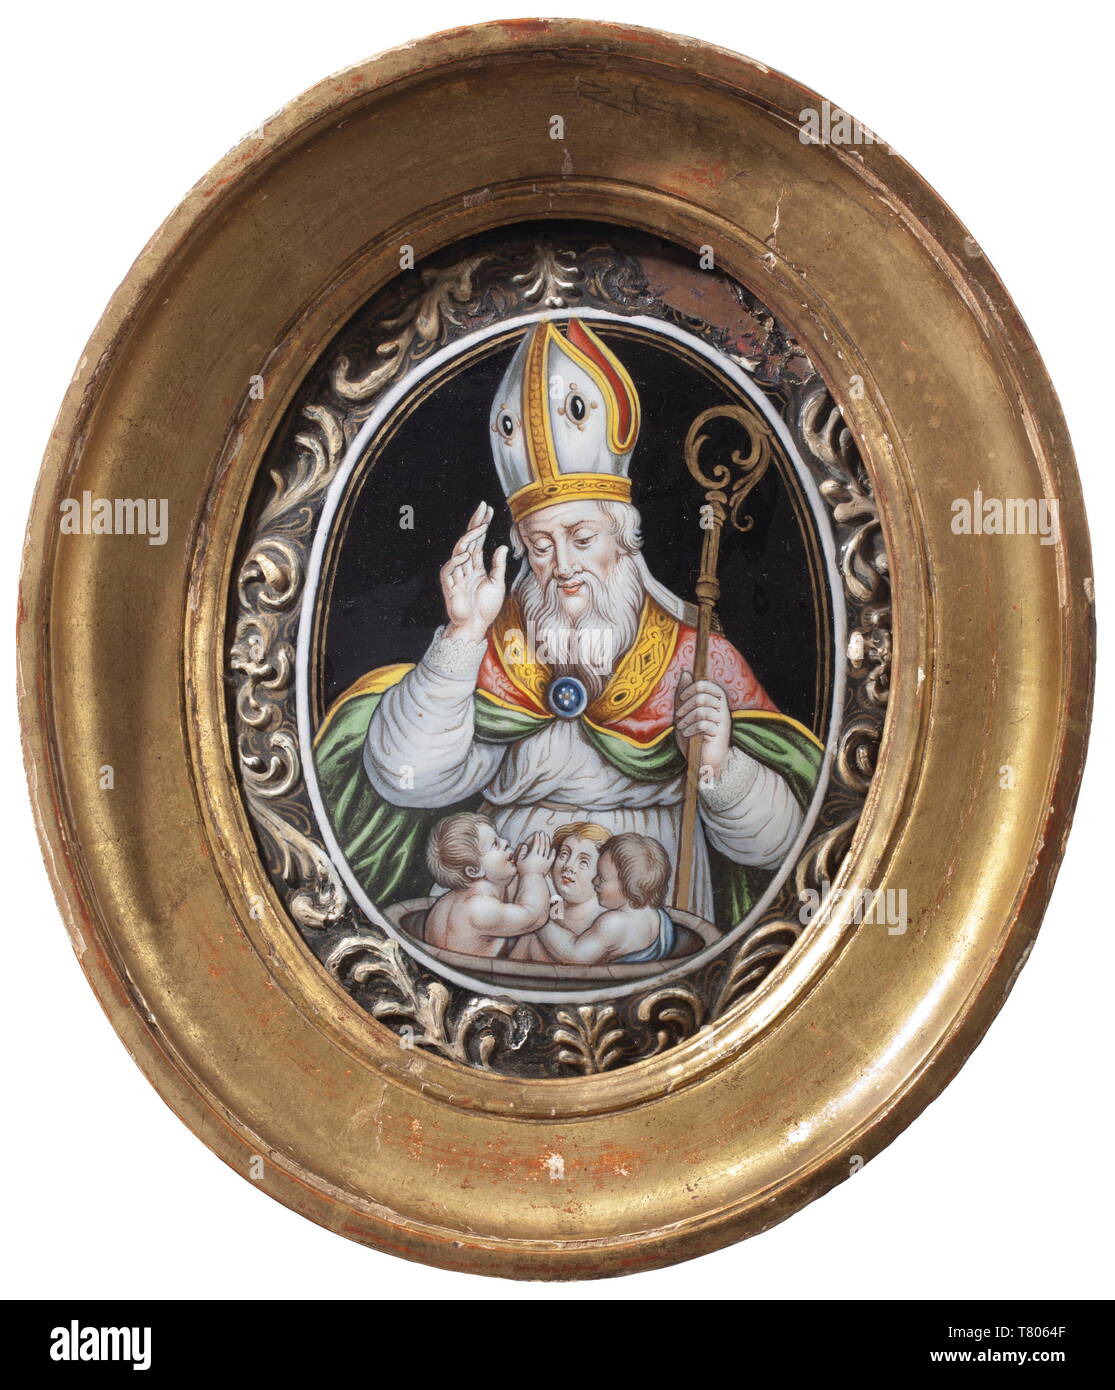 An enamel picture of Saint Nicholas, Laudin, Limoges, end of the 17th century. Slightly curved, polychrome depiction of Nicholas conveying a blessing, with three children. The edge with continuous floral border (damaged on the upper side). The reverse side with golden inscription 'Laudin au Fauxbourgs De Manigne a Limoges I.L.'. In a profiled (slightly damaged) gold frame. Height of the picture circa 16 cm, height of the frame 22.5 cm. historic, historical, handicrafts, handcraft, craft, object, objects, stills, clipping, clippings, cut out, cut-, Additional-Rights-Clearance-Info-Not-Available Stock Photo